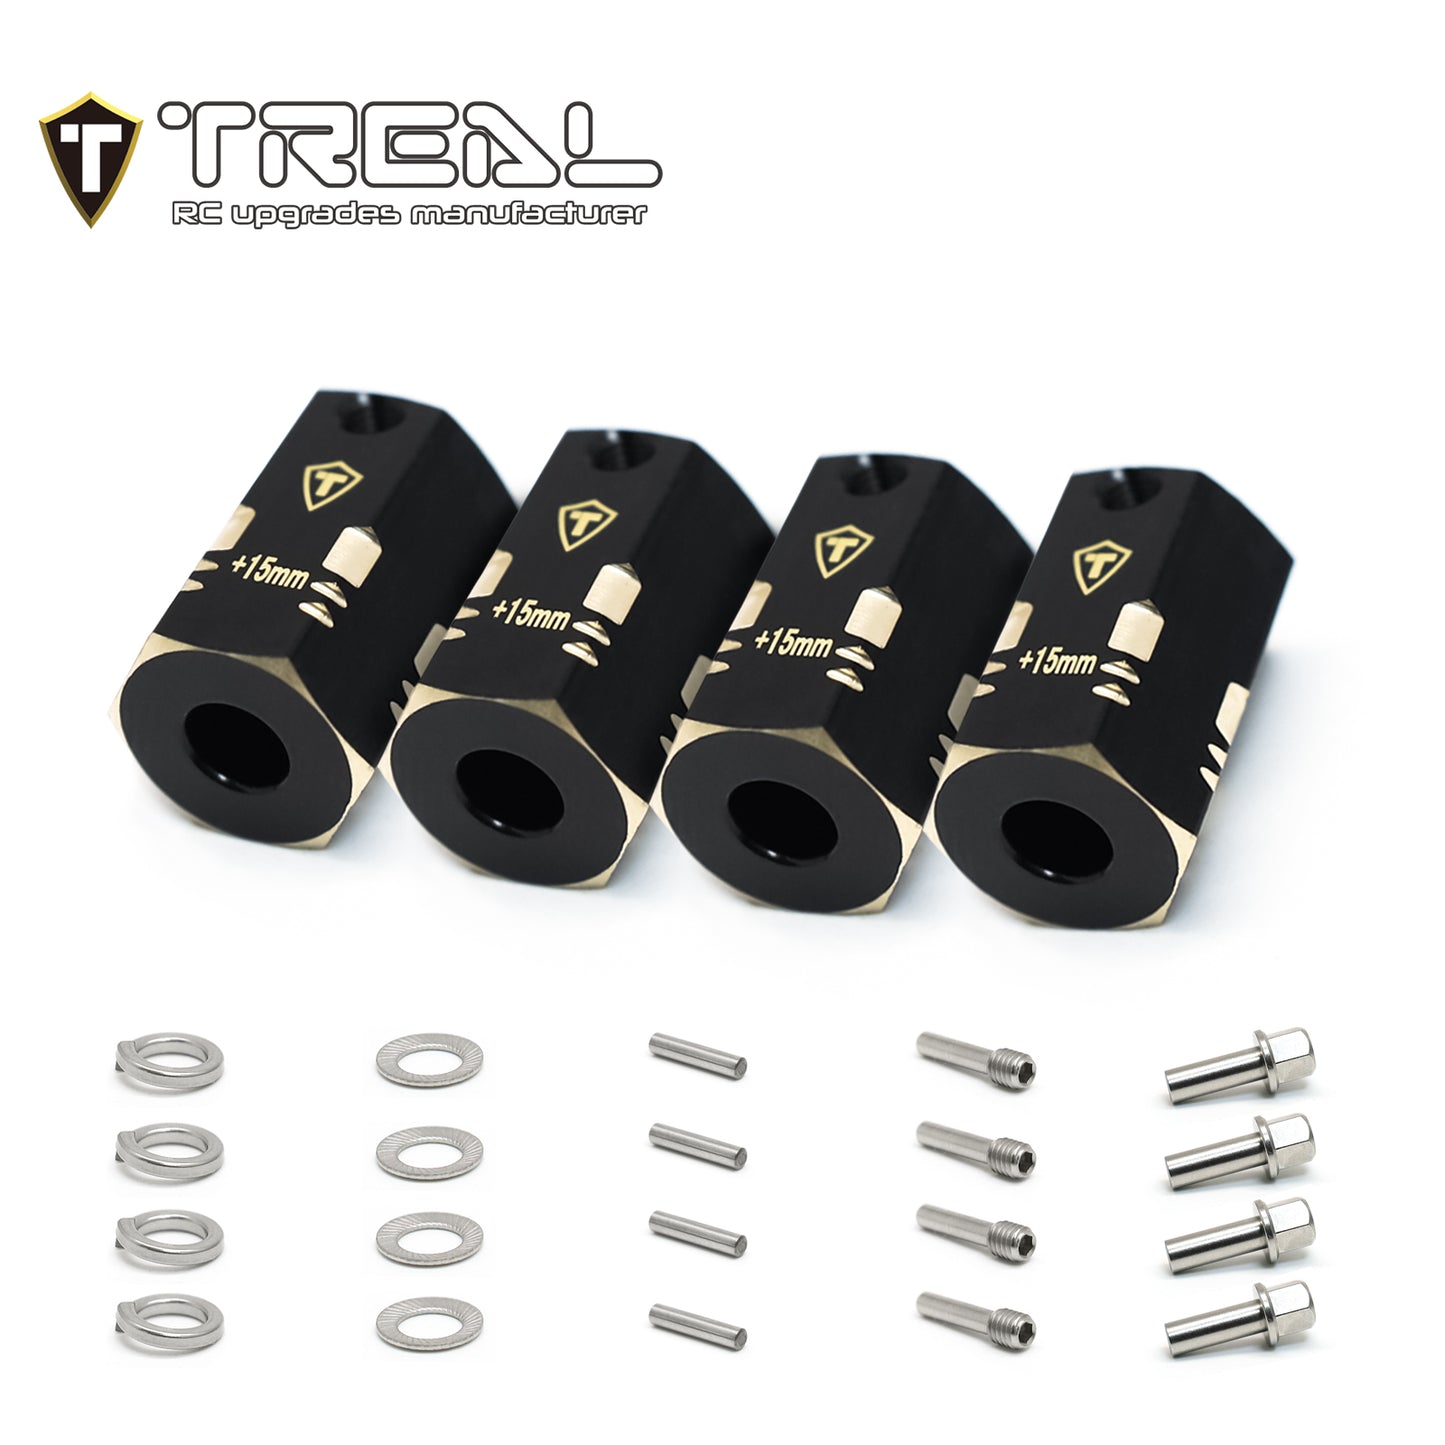 TREAL Brass 12mm Wheel Hex Adapters Extended(4pcs) for 1/10 RC Crawler Axial SCX10 III, SCX10 II ,Capra (Height:20mm)